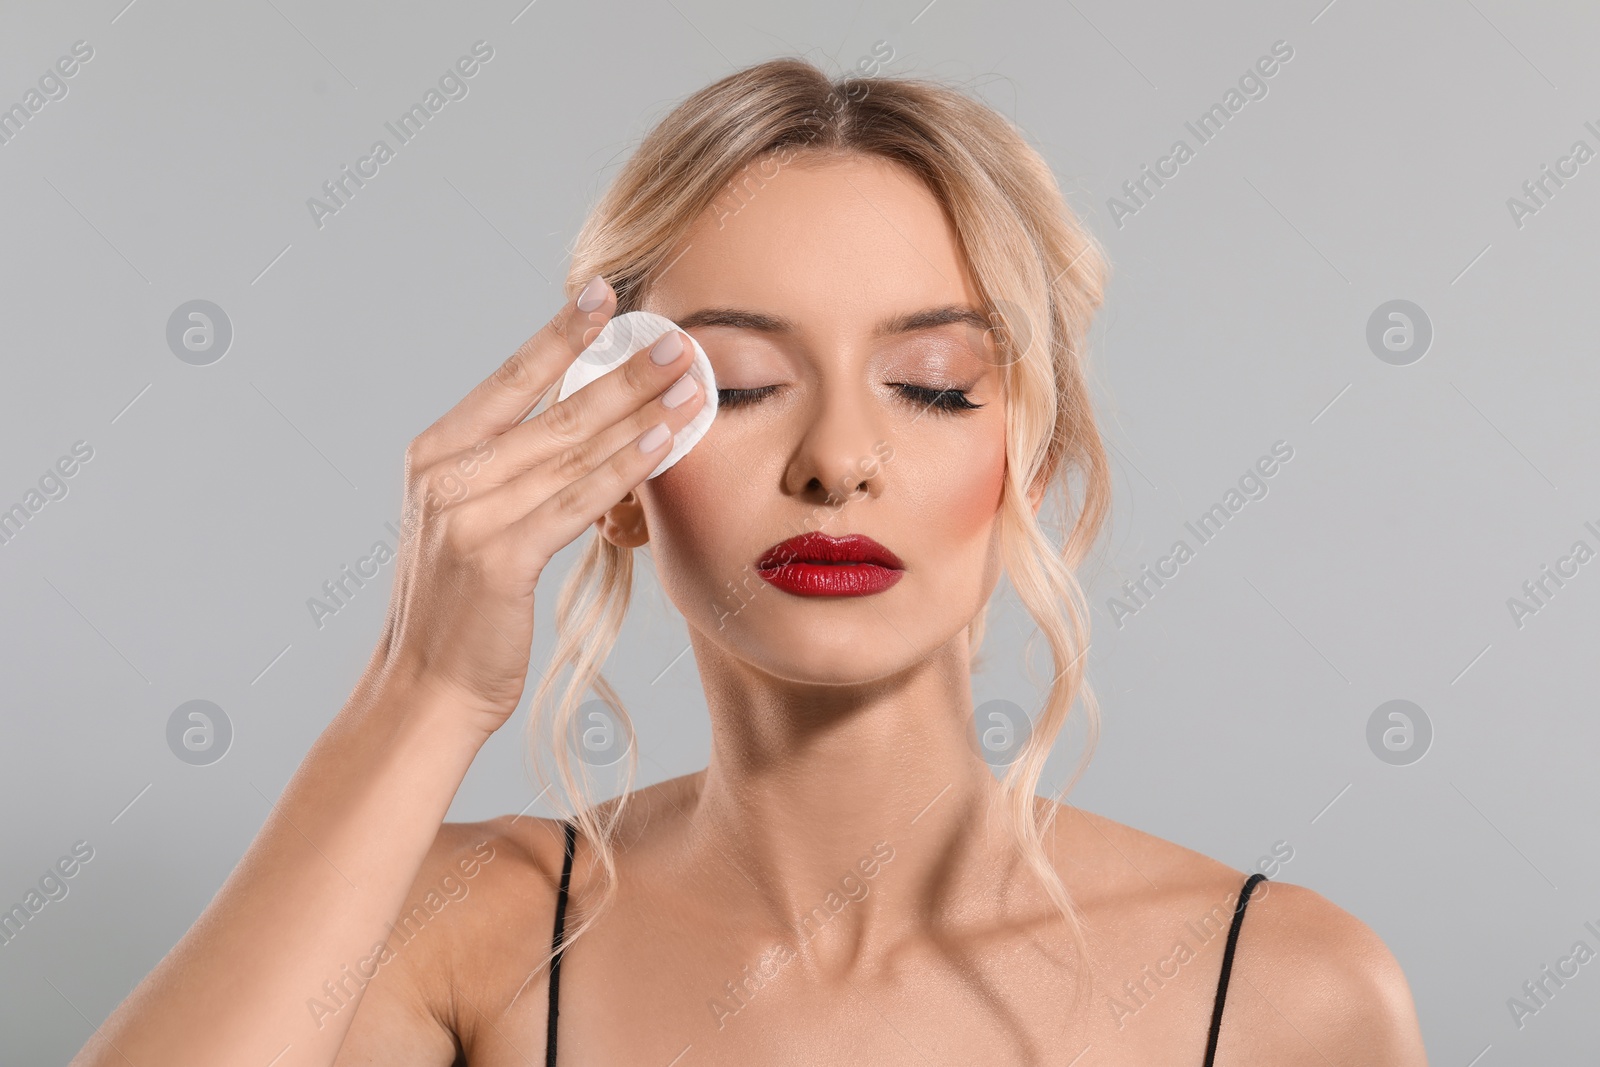 Photo of Beautiful woman removing makeup with cotton pad on light grey background